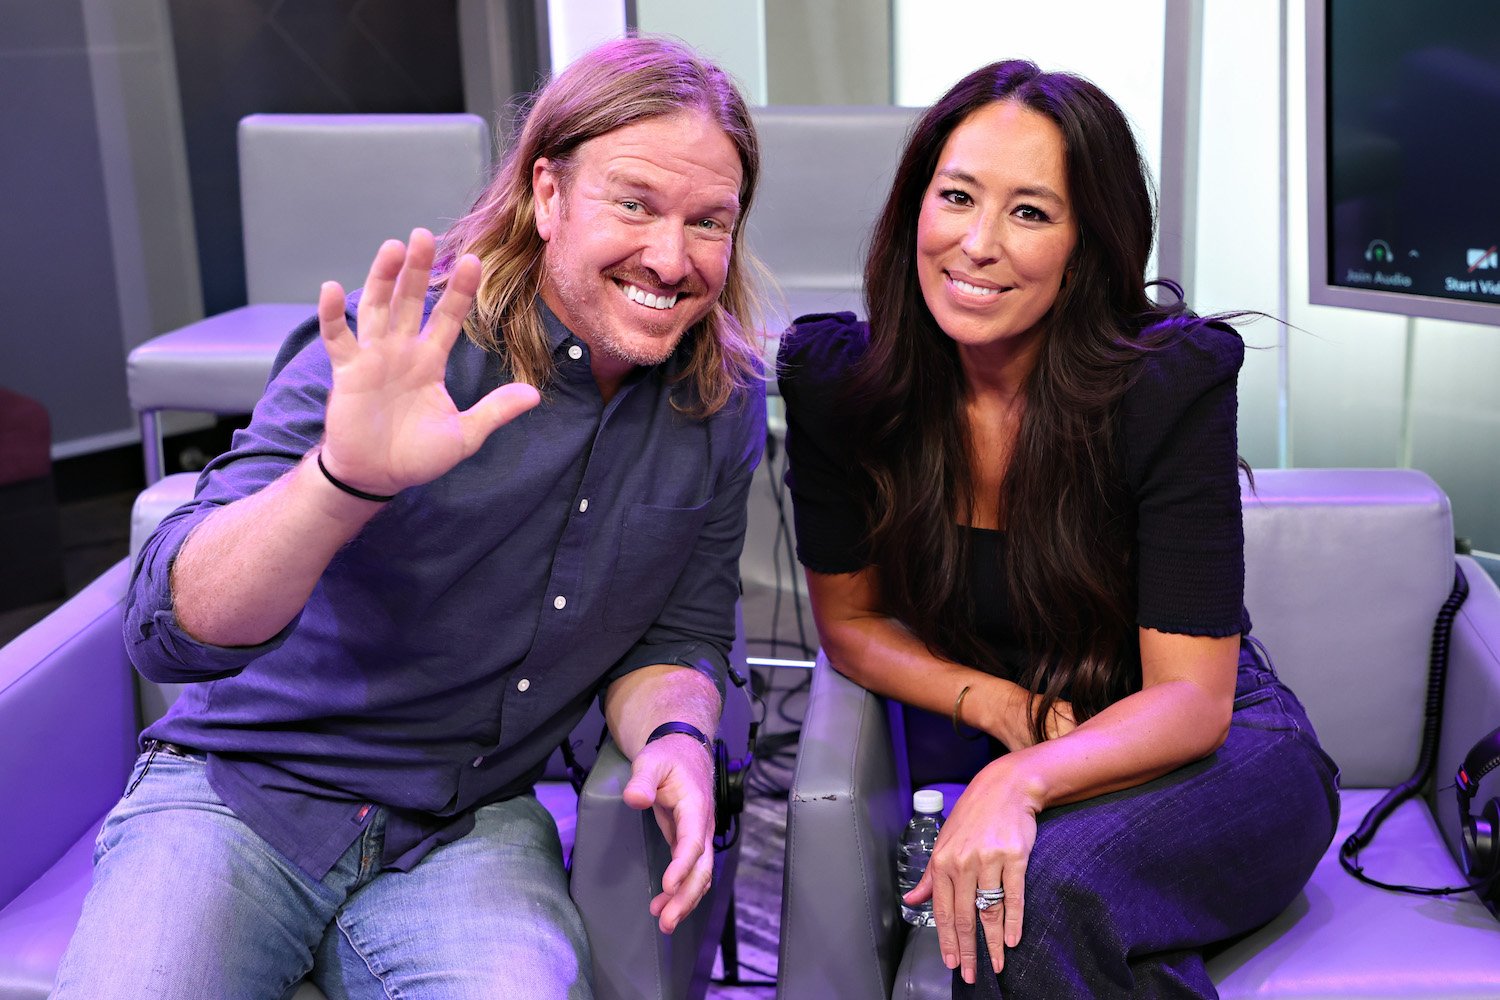 Chip Gaines smiles and waives sitting next to Joanna Gaines smiling